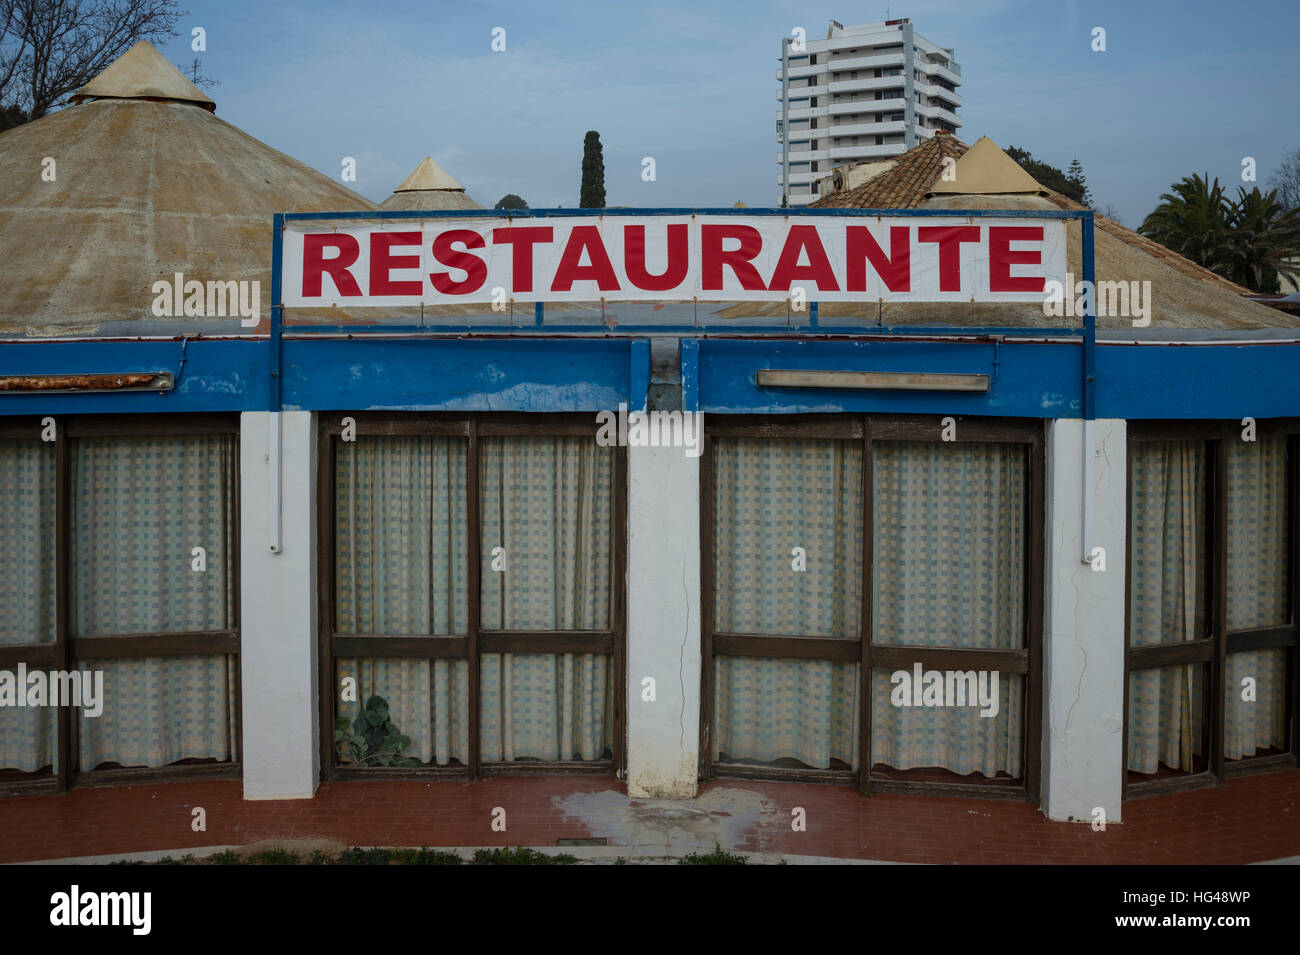 Restaurant Restaurante High Resolution Stock Photography and Images - Alamy